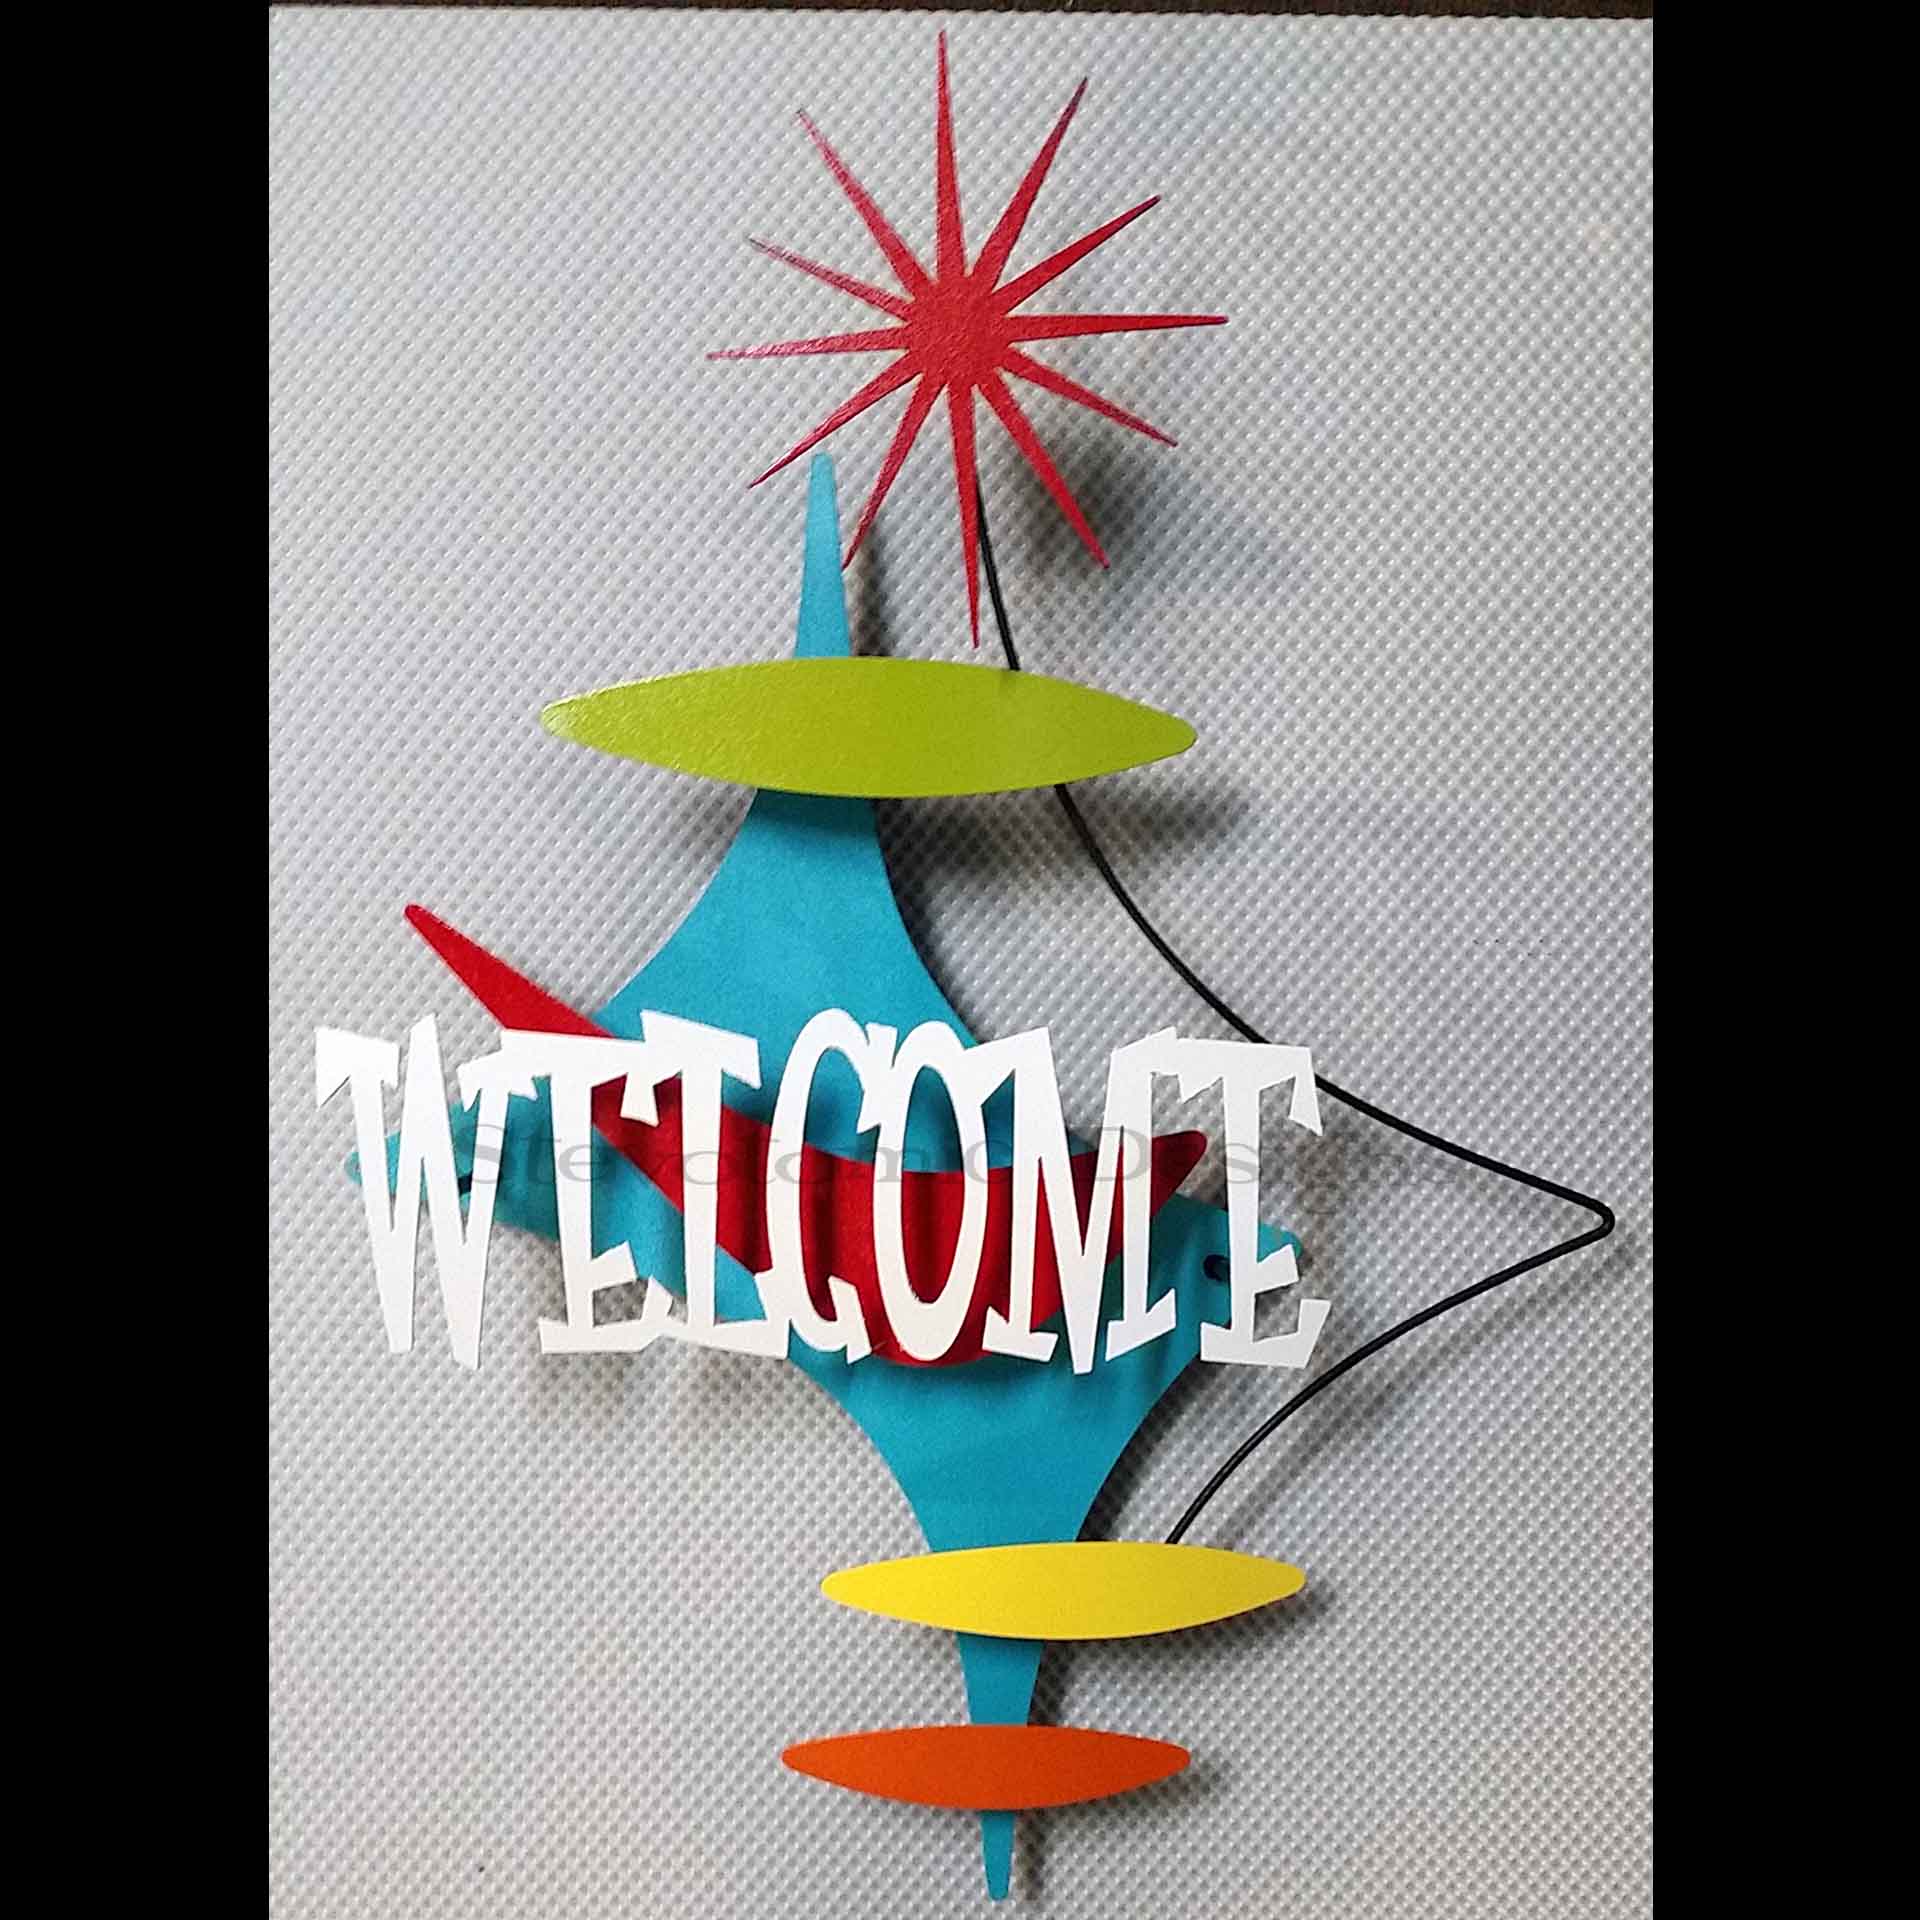 WELCOME-017-0009